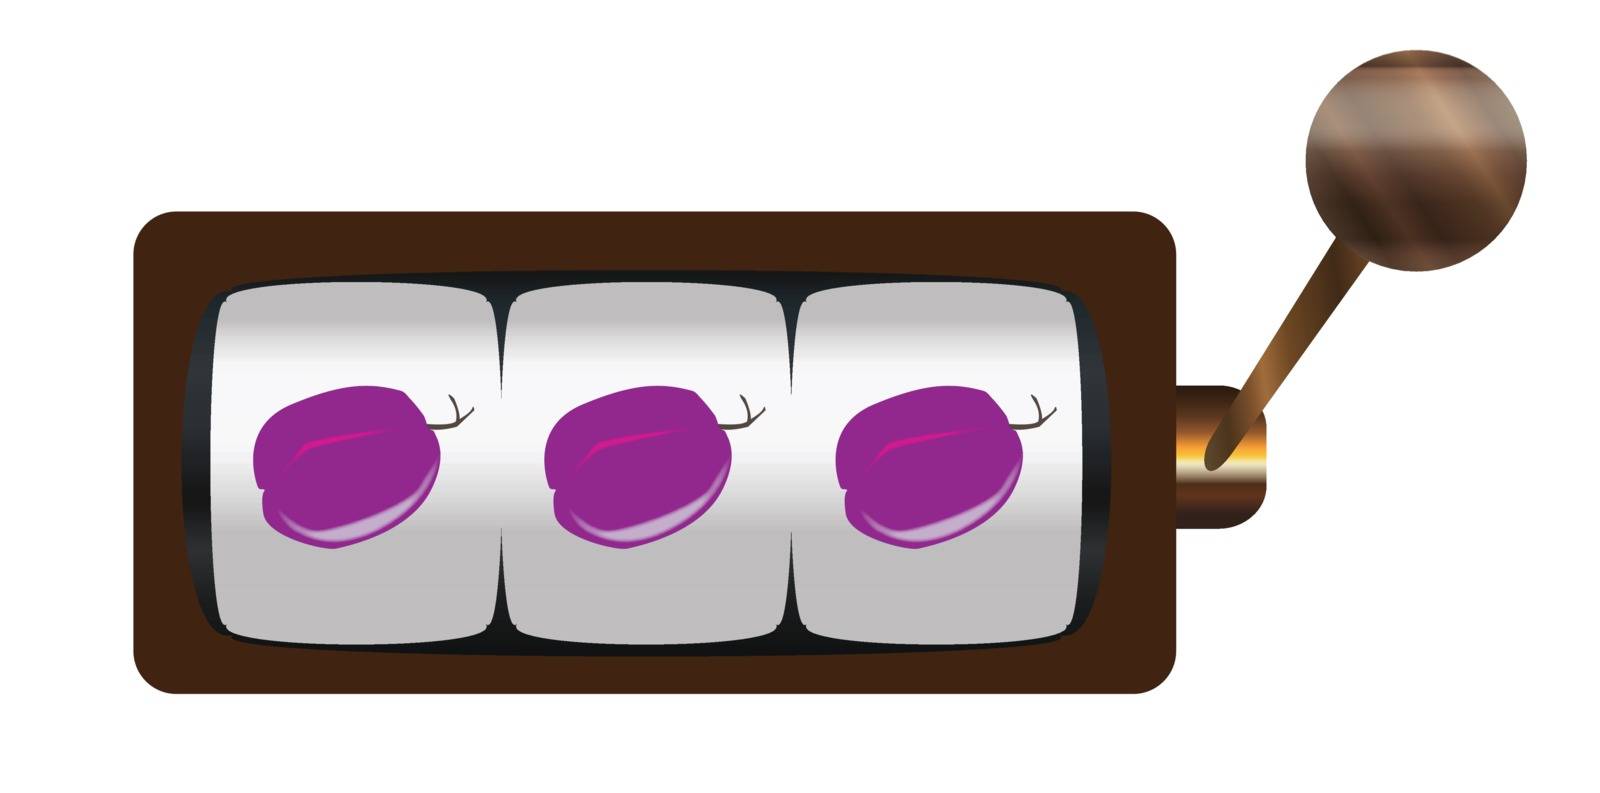 Fruit Machine 3 Plum Icons With Handle And Knob by Bigalbaloo